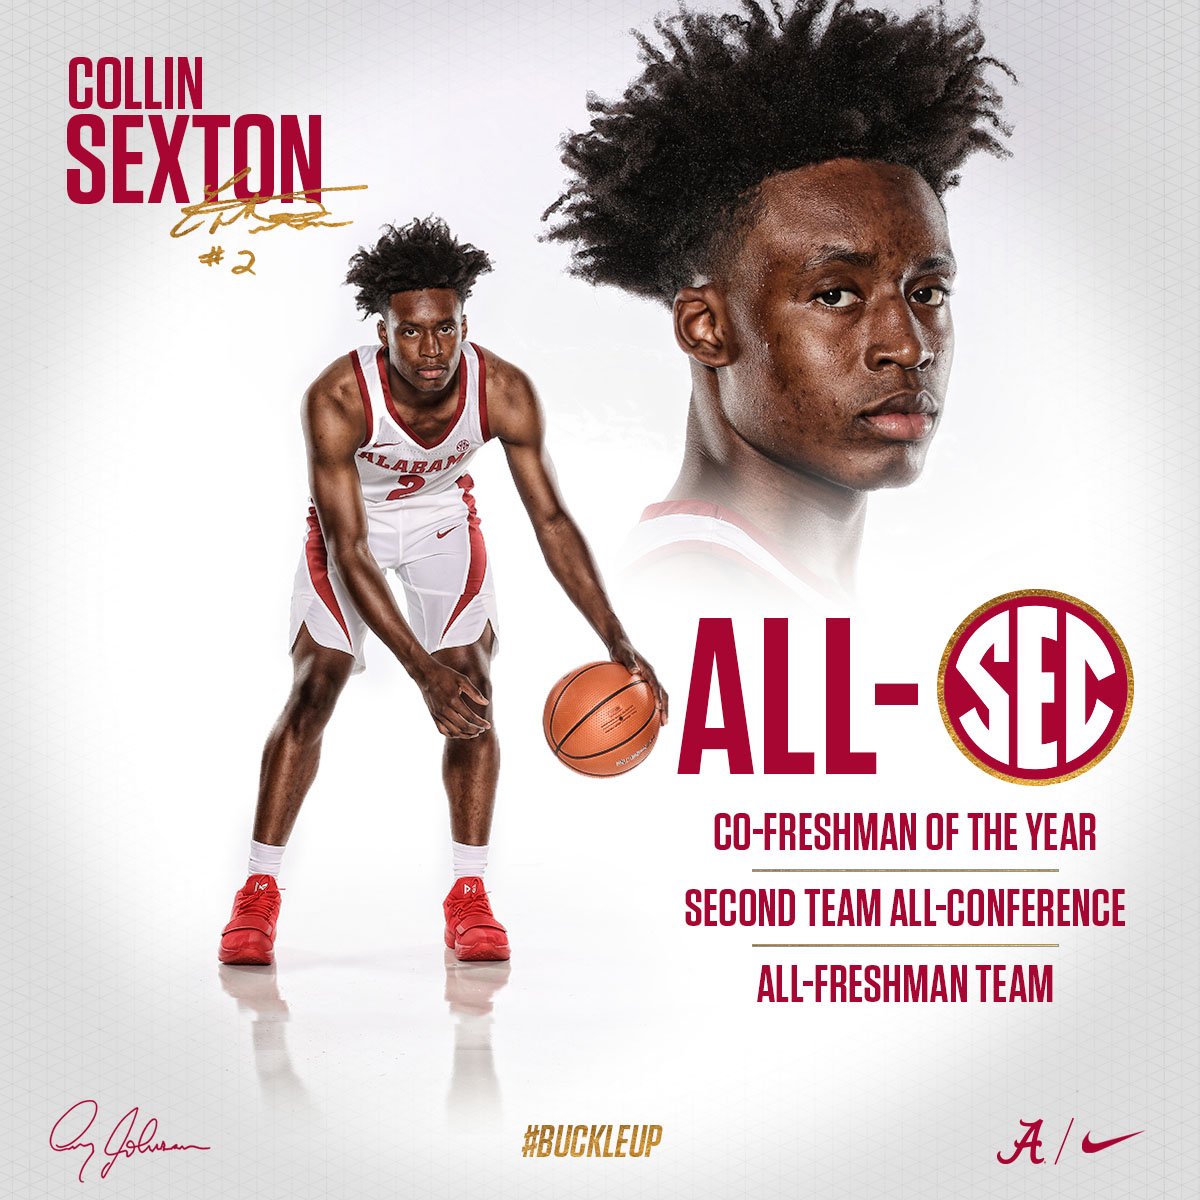 Alabama Men's Basketball on X: Congratulations to Collin Sexton on being  named the 2018 SEC Co-Freshman of the Year. Sexton becomes the 2nd player  in program history to earn the honor, joining